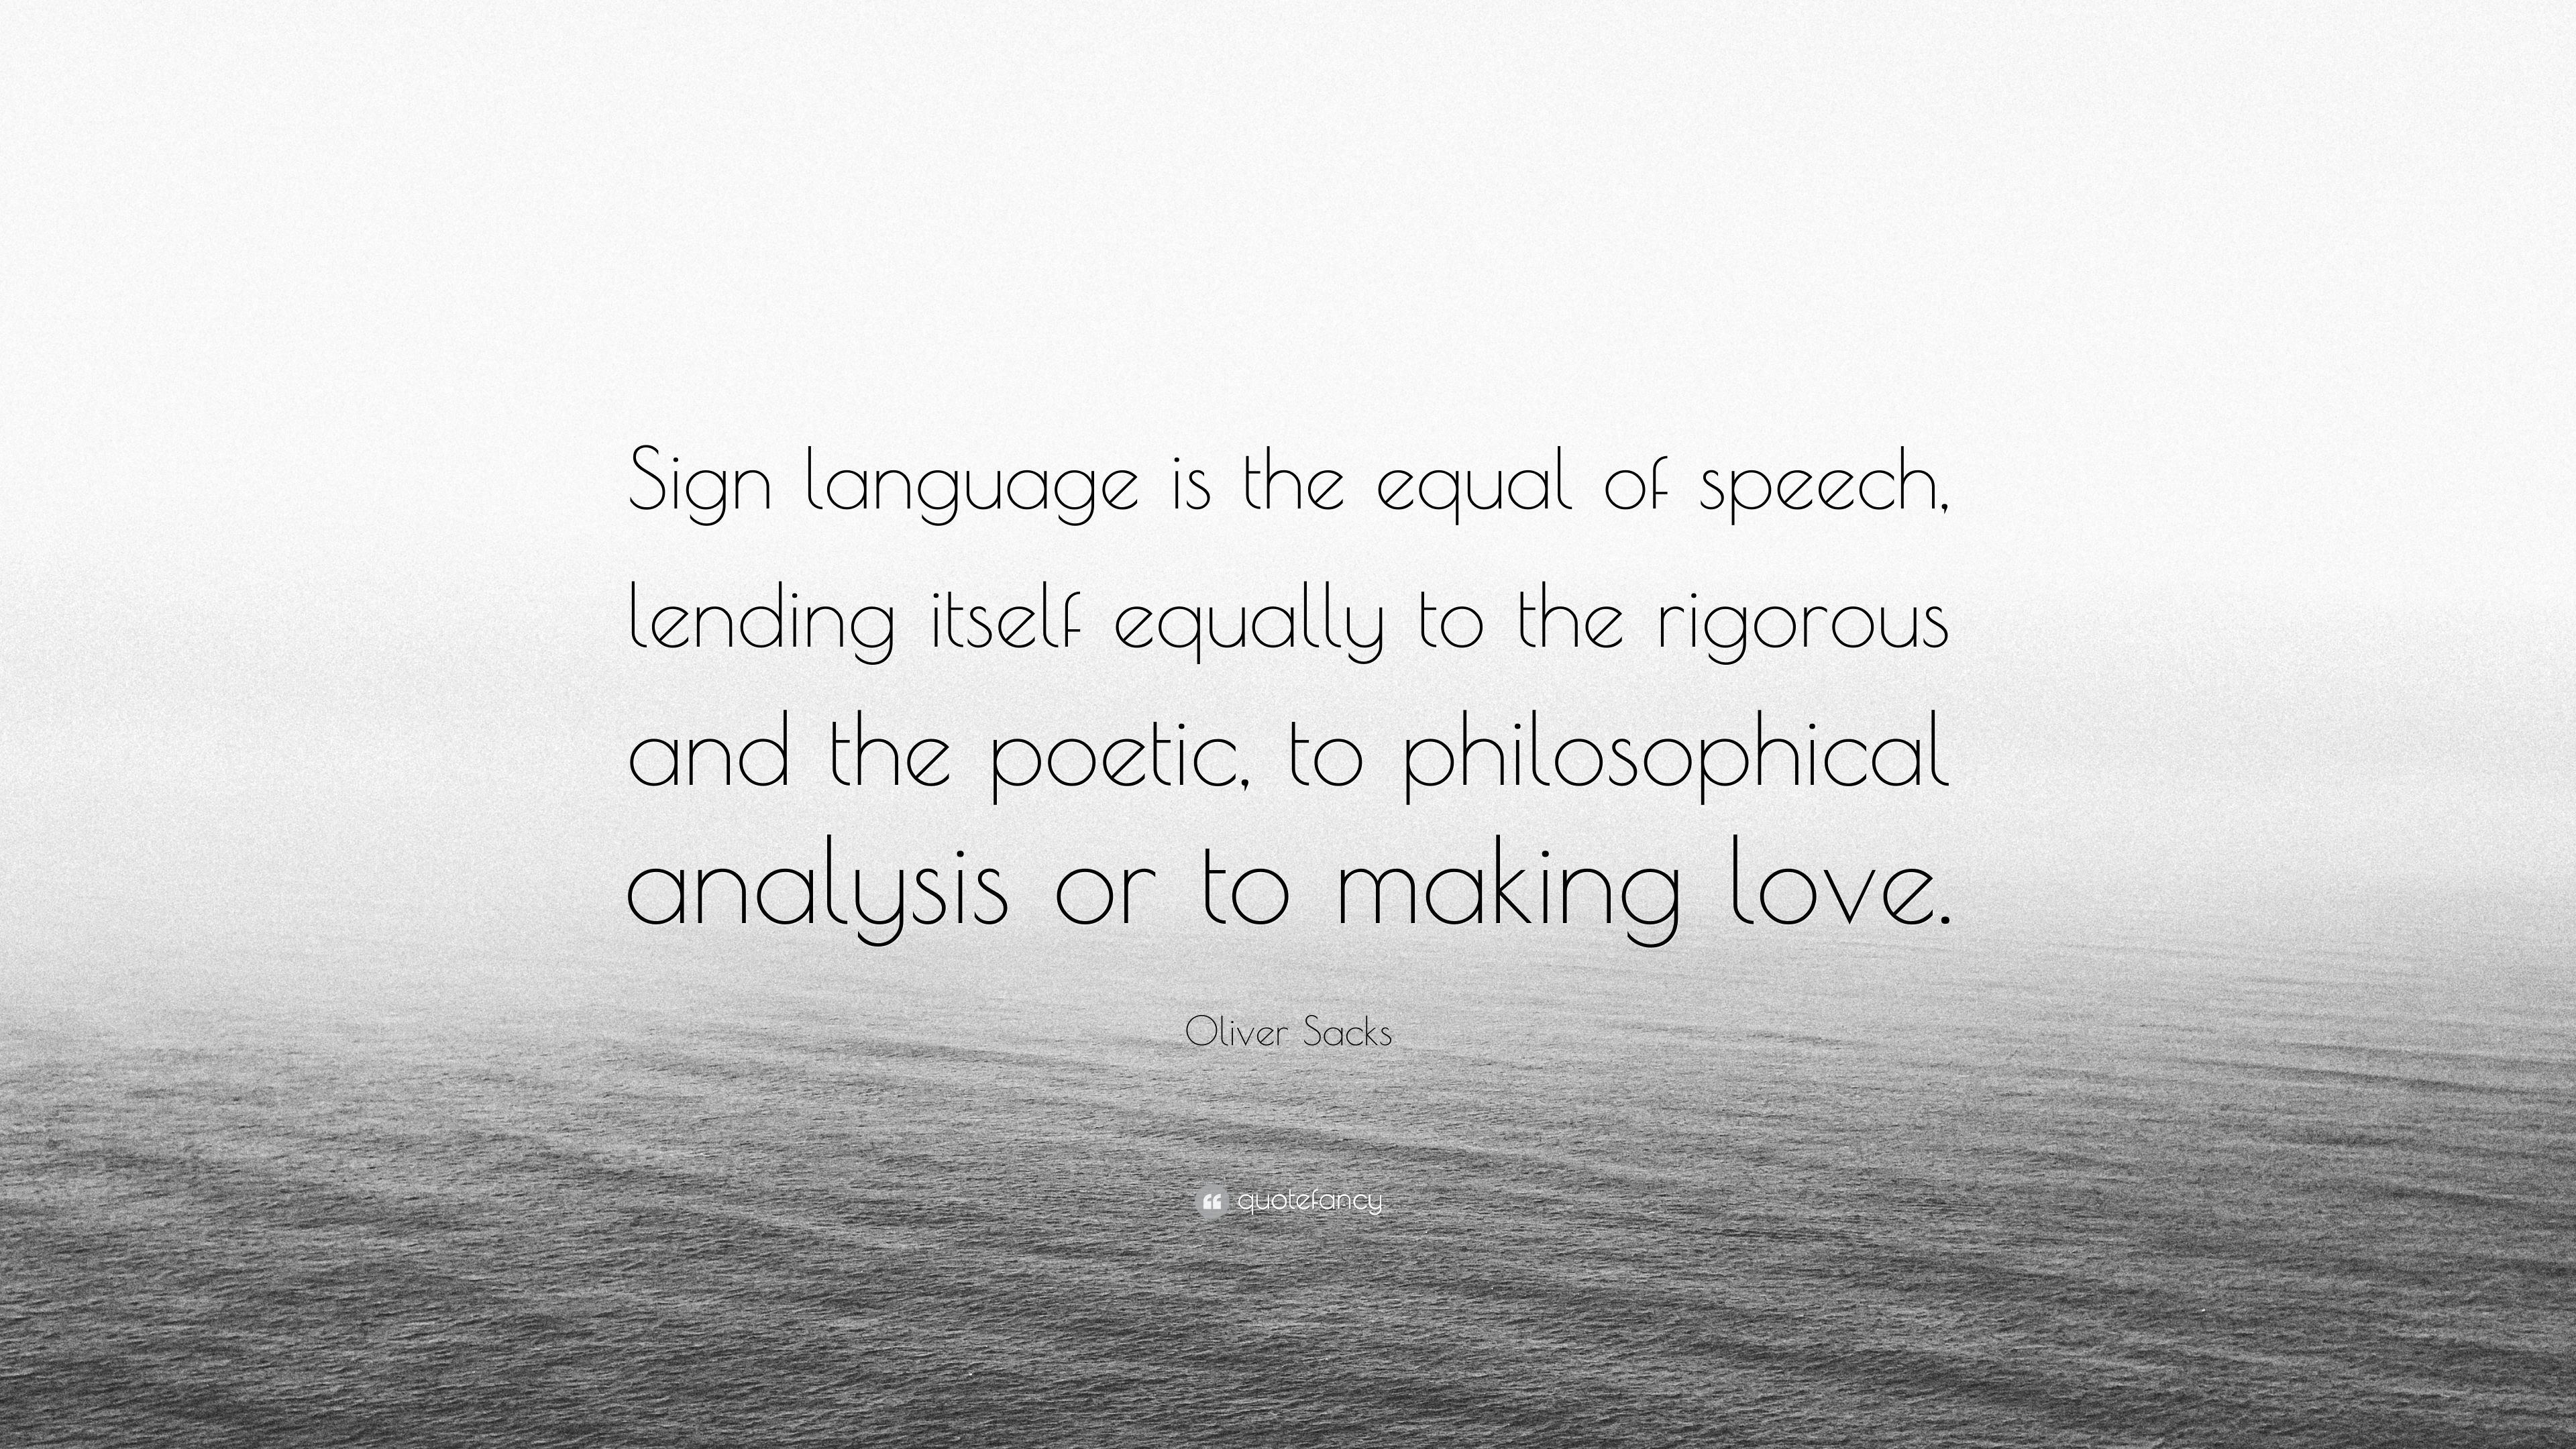 Oliver Sacks Quote: “Sign language is the equal of speech, lending